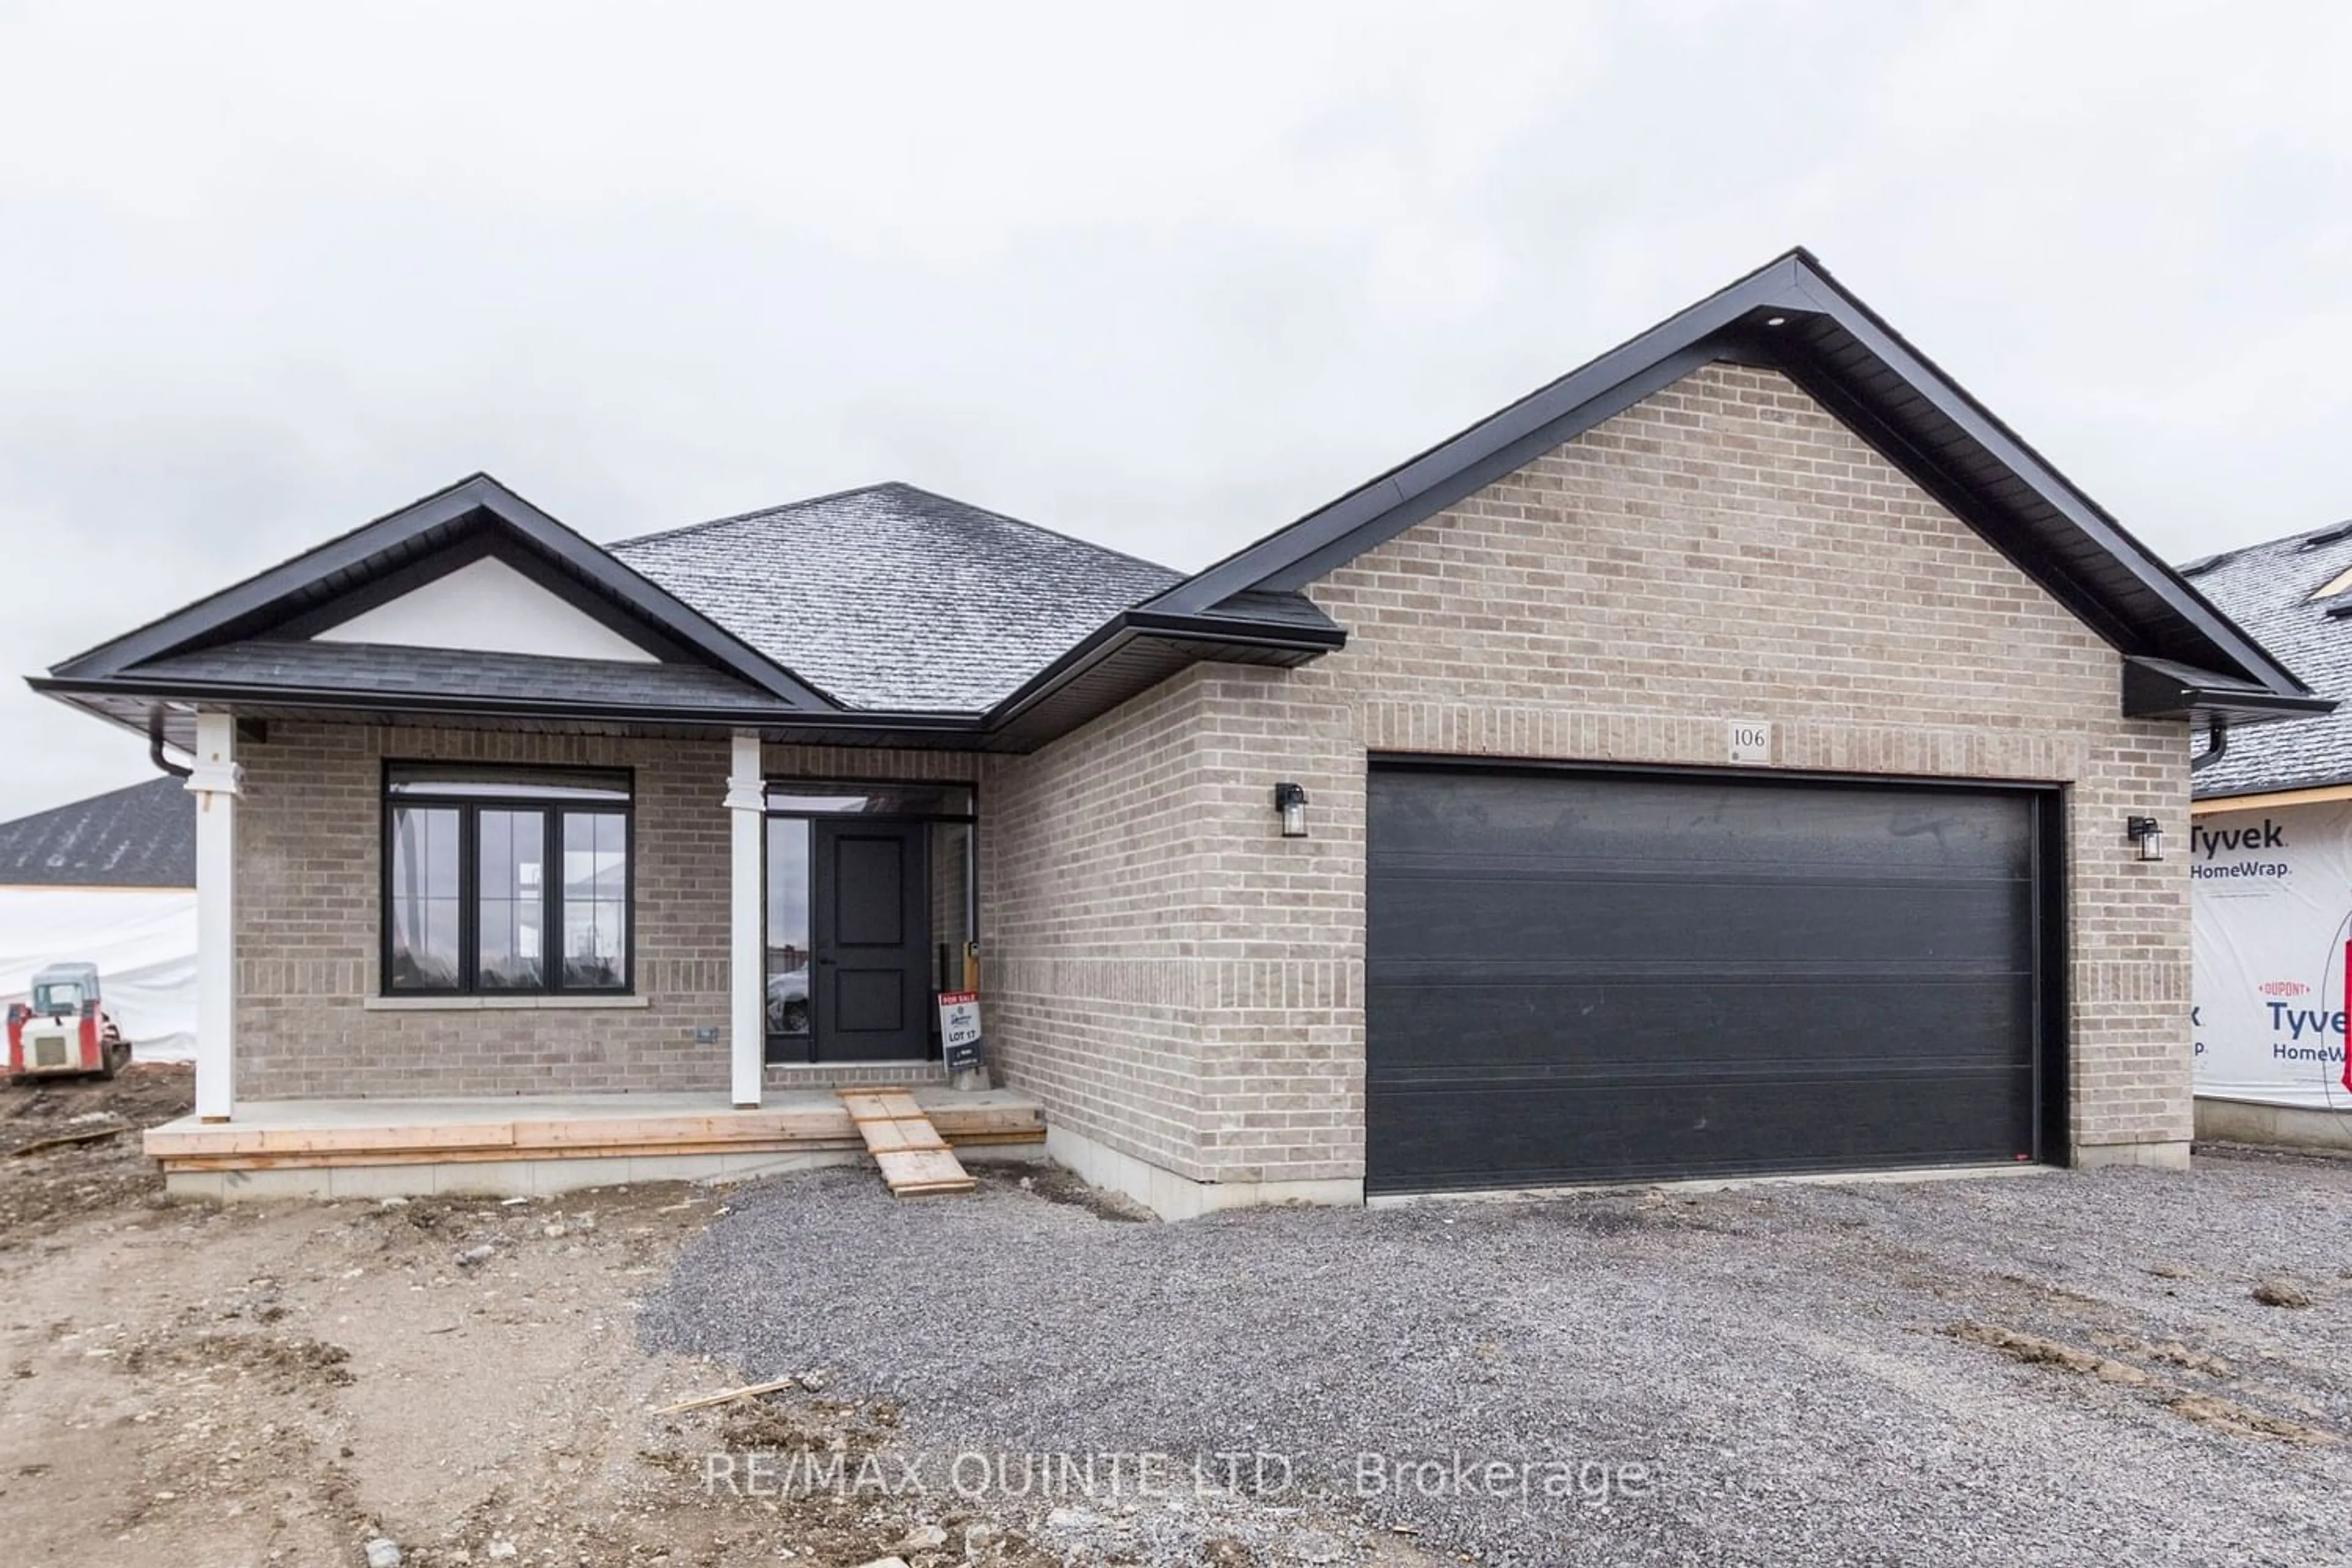 Home with brick exterior material for 106 Raycroft Dr, Belleville Ontario K8N 0R4